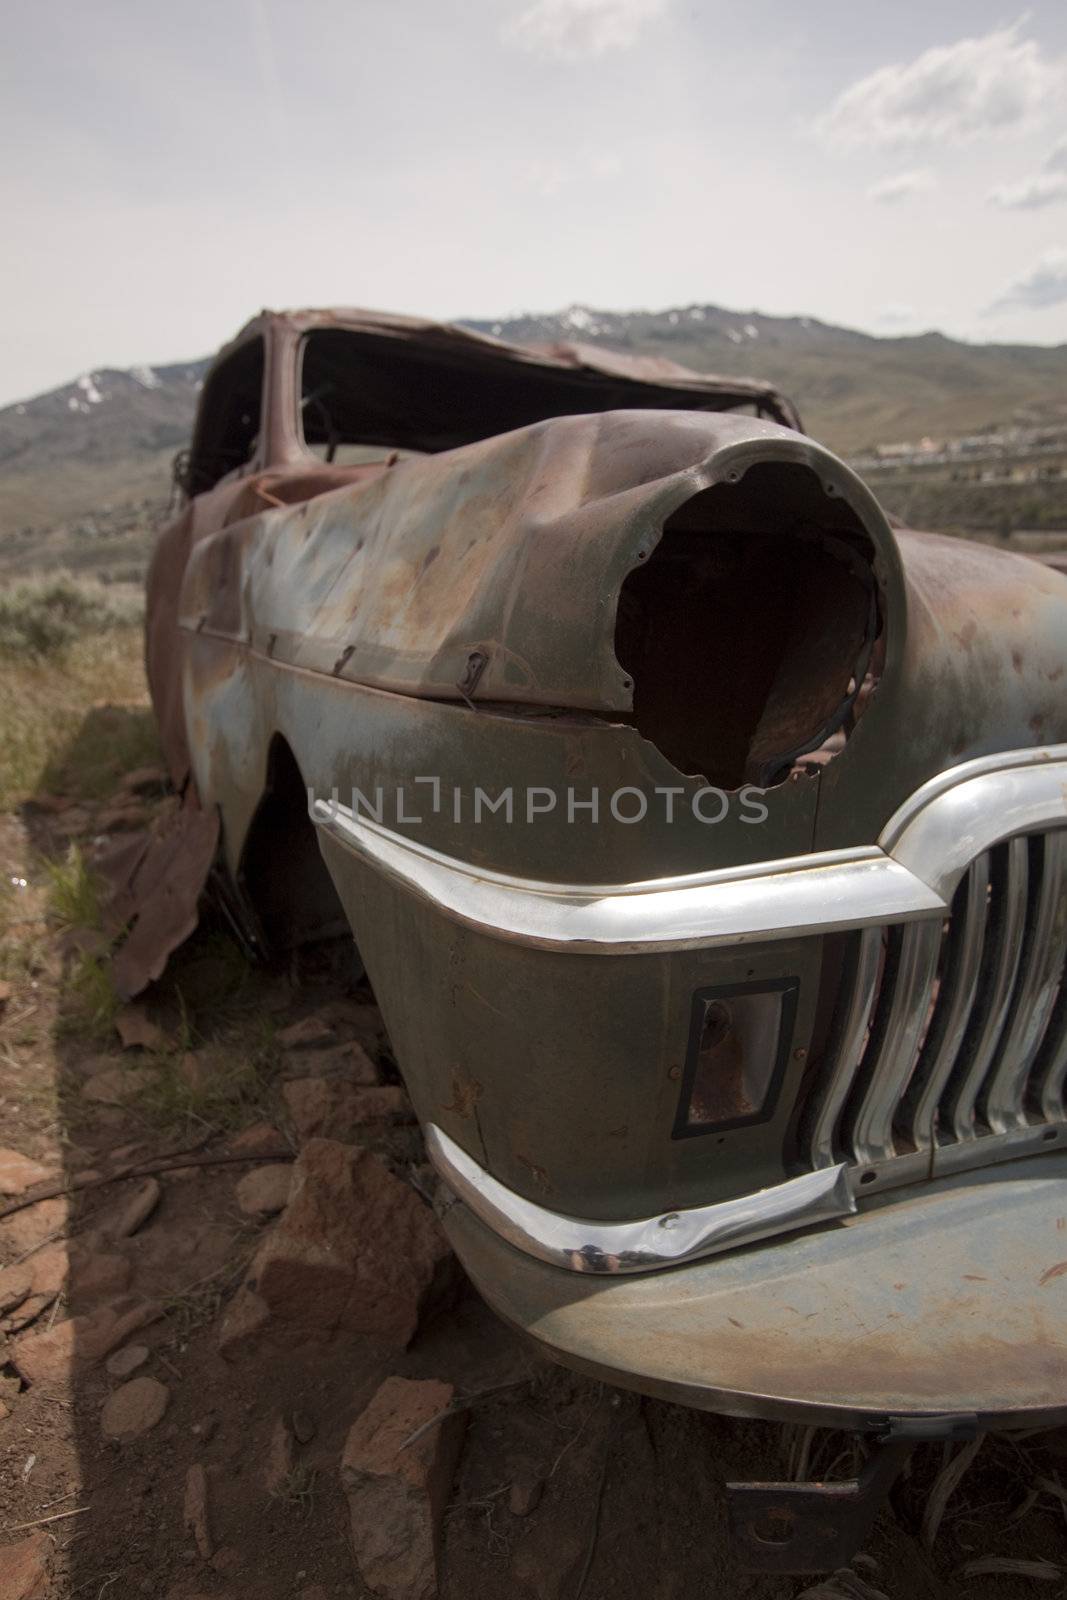 Old abandoned car with bullet holes by jeremywhat